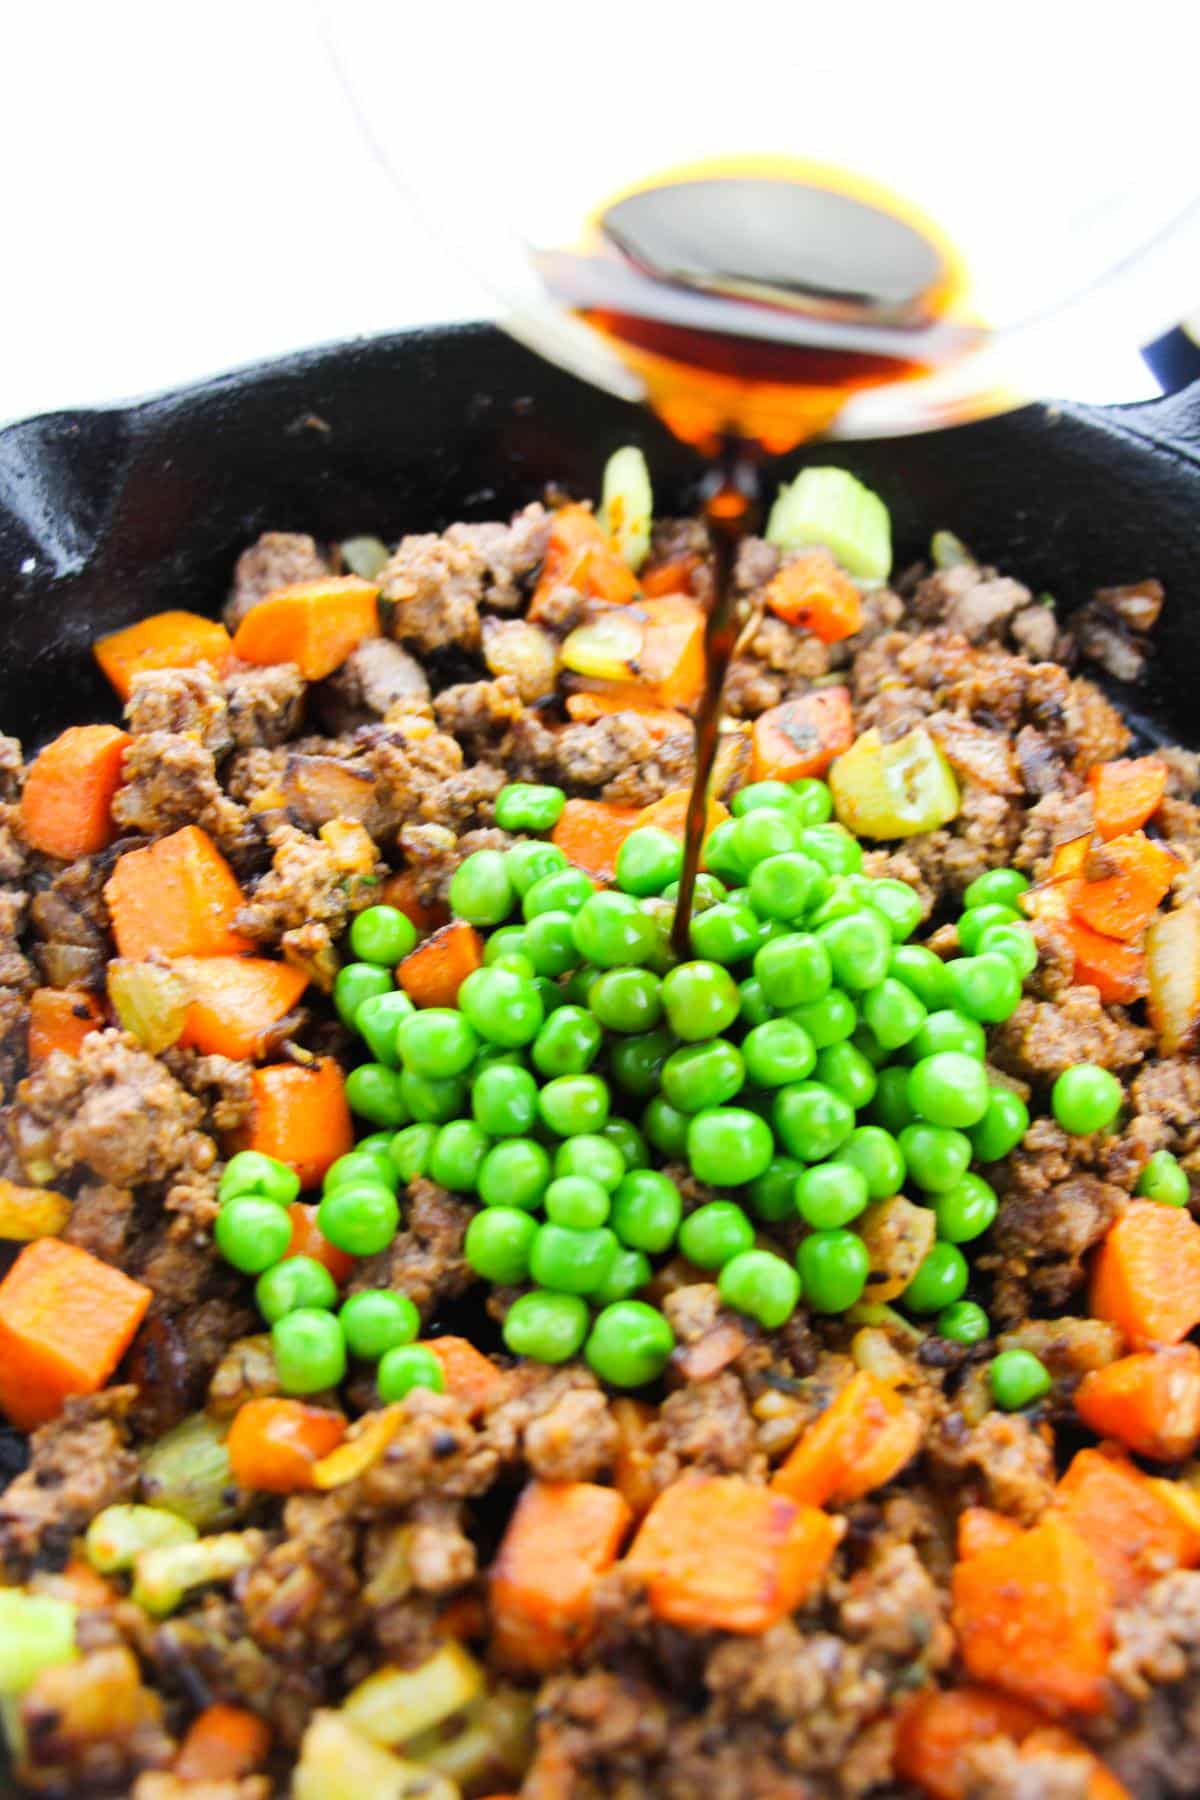 Worcestershire sauce is being poured in the mixed vegetables and ground beef mixture.